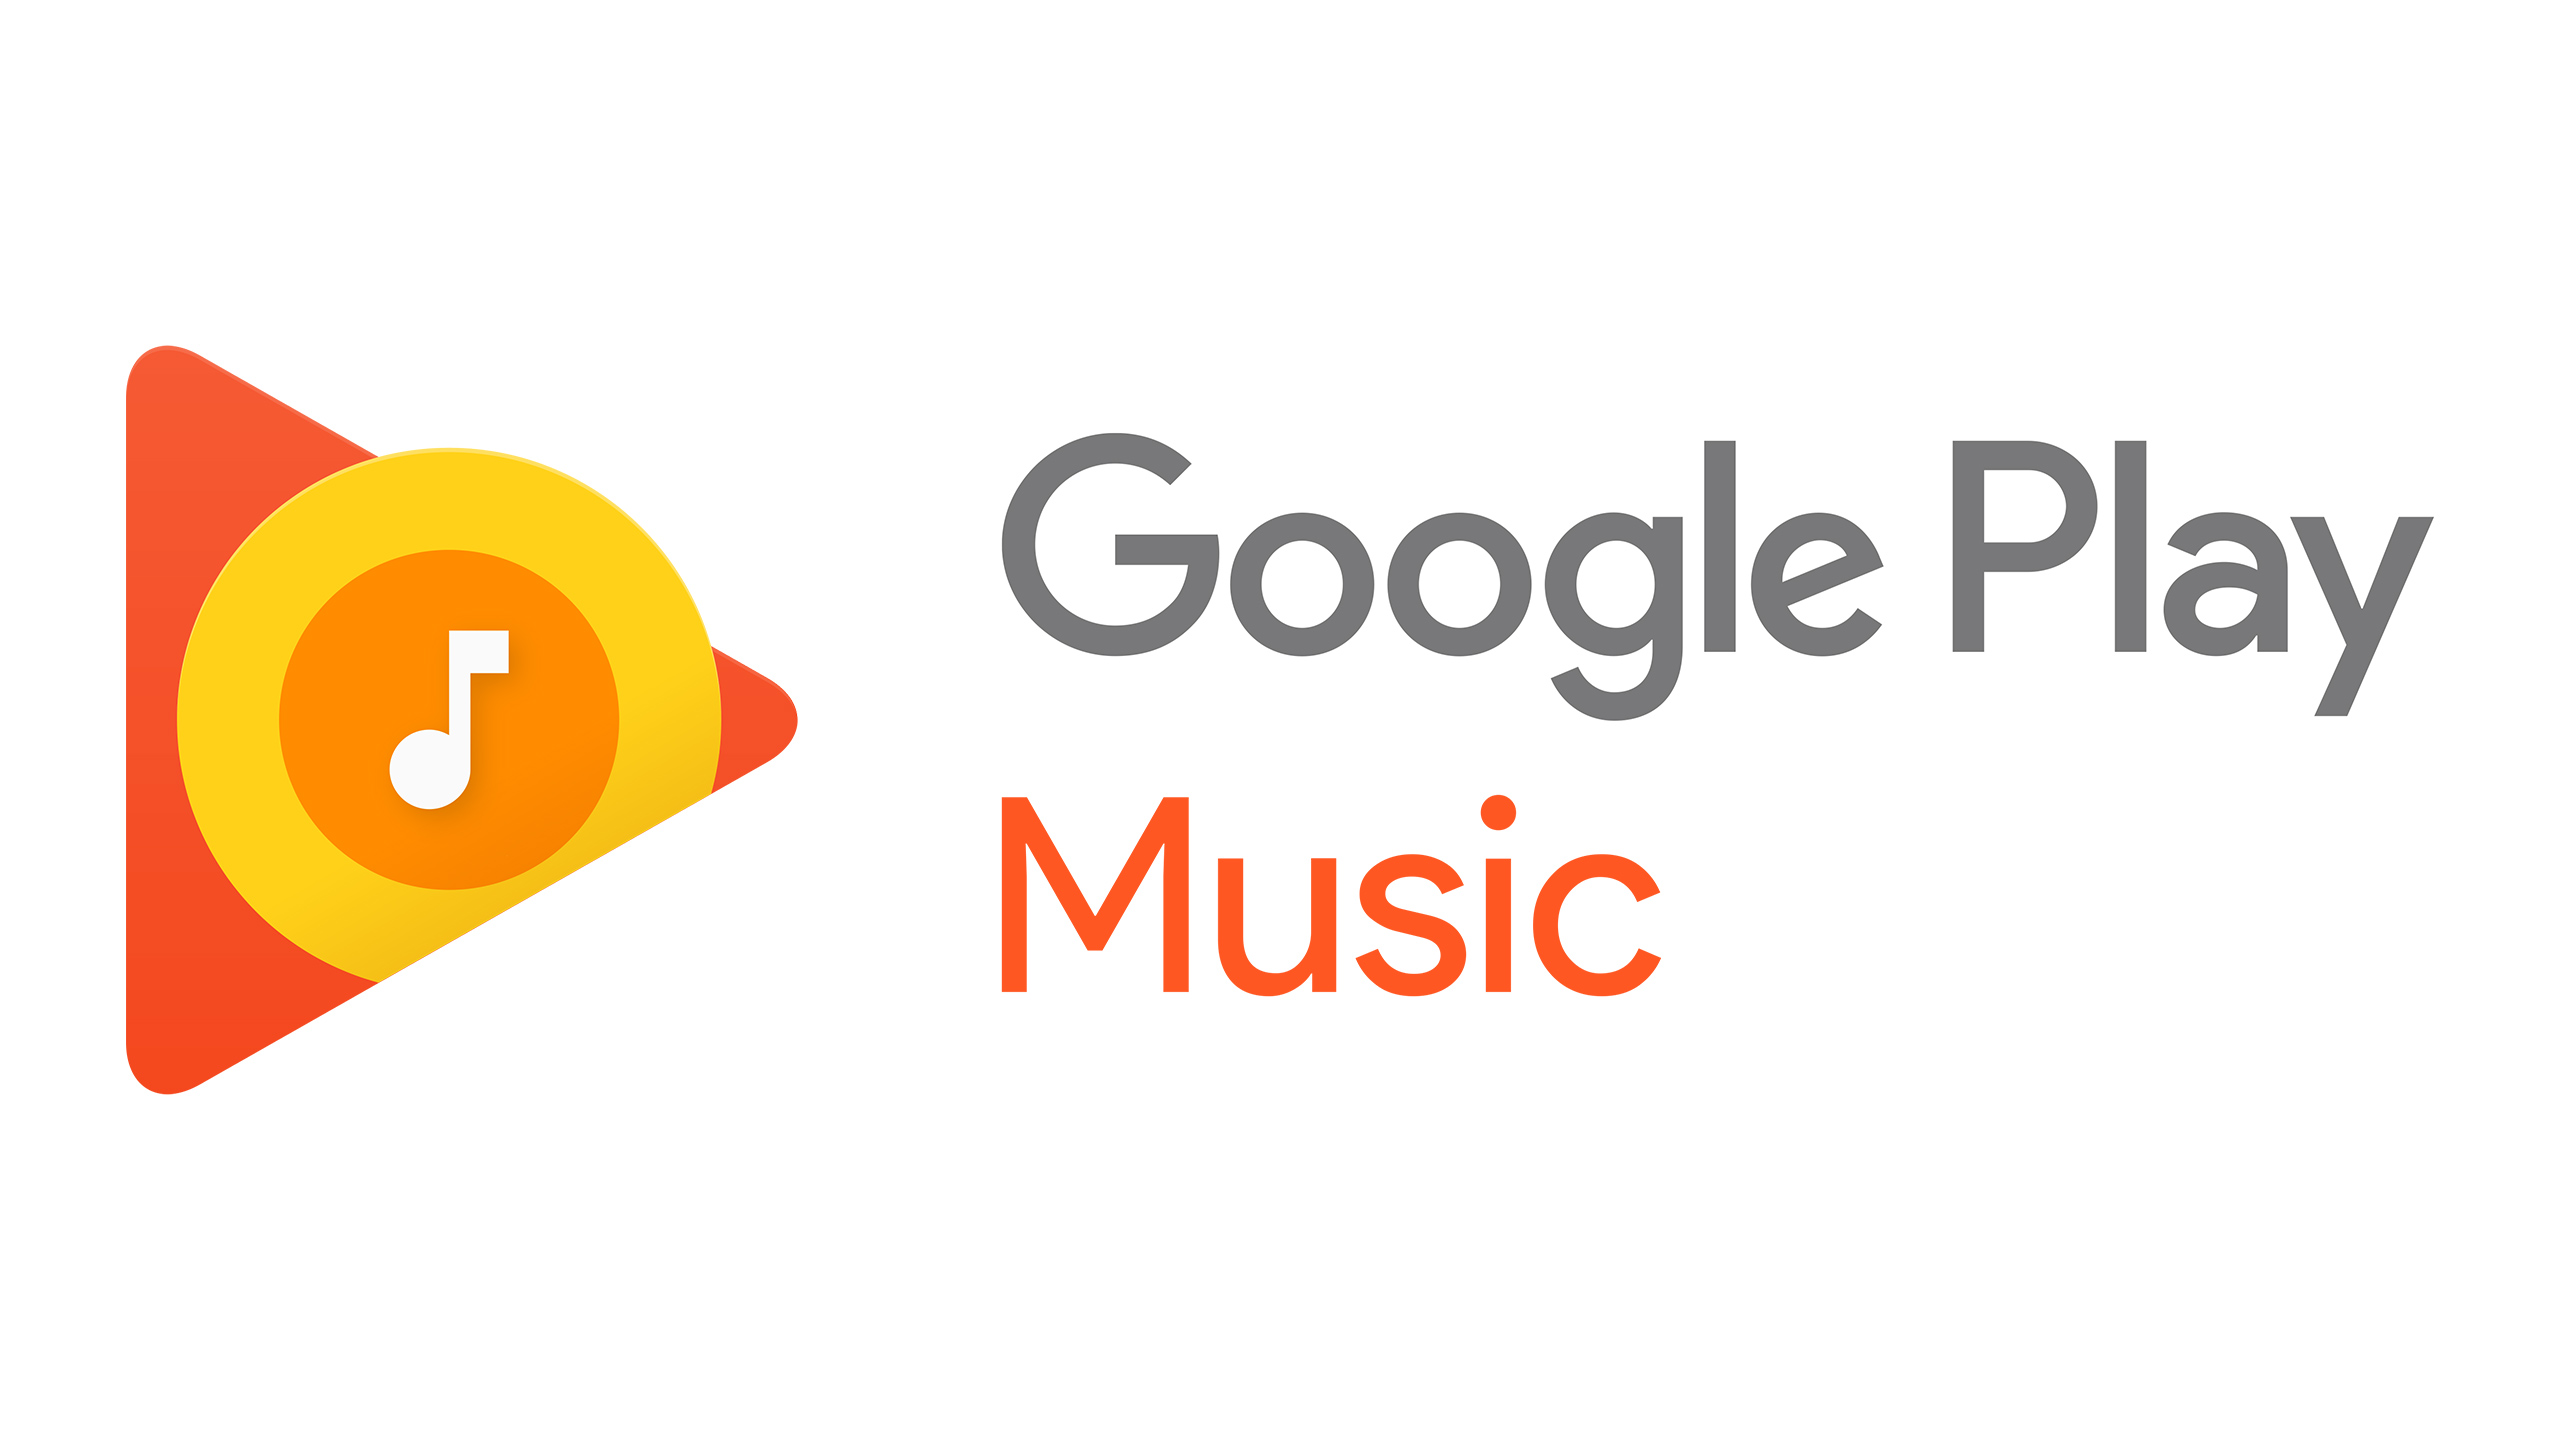 Google Play Music users should transfer their playlists ASAP.